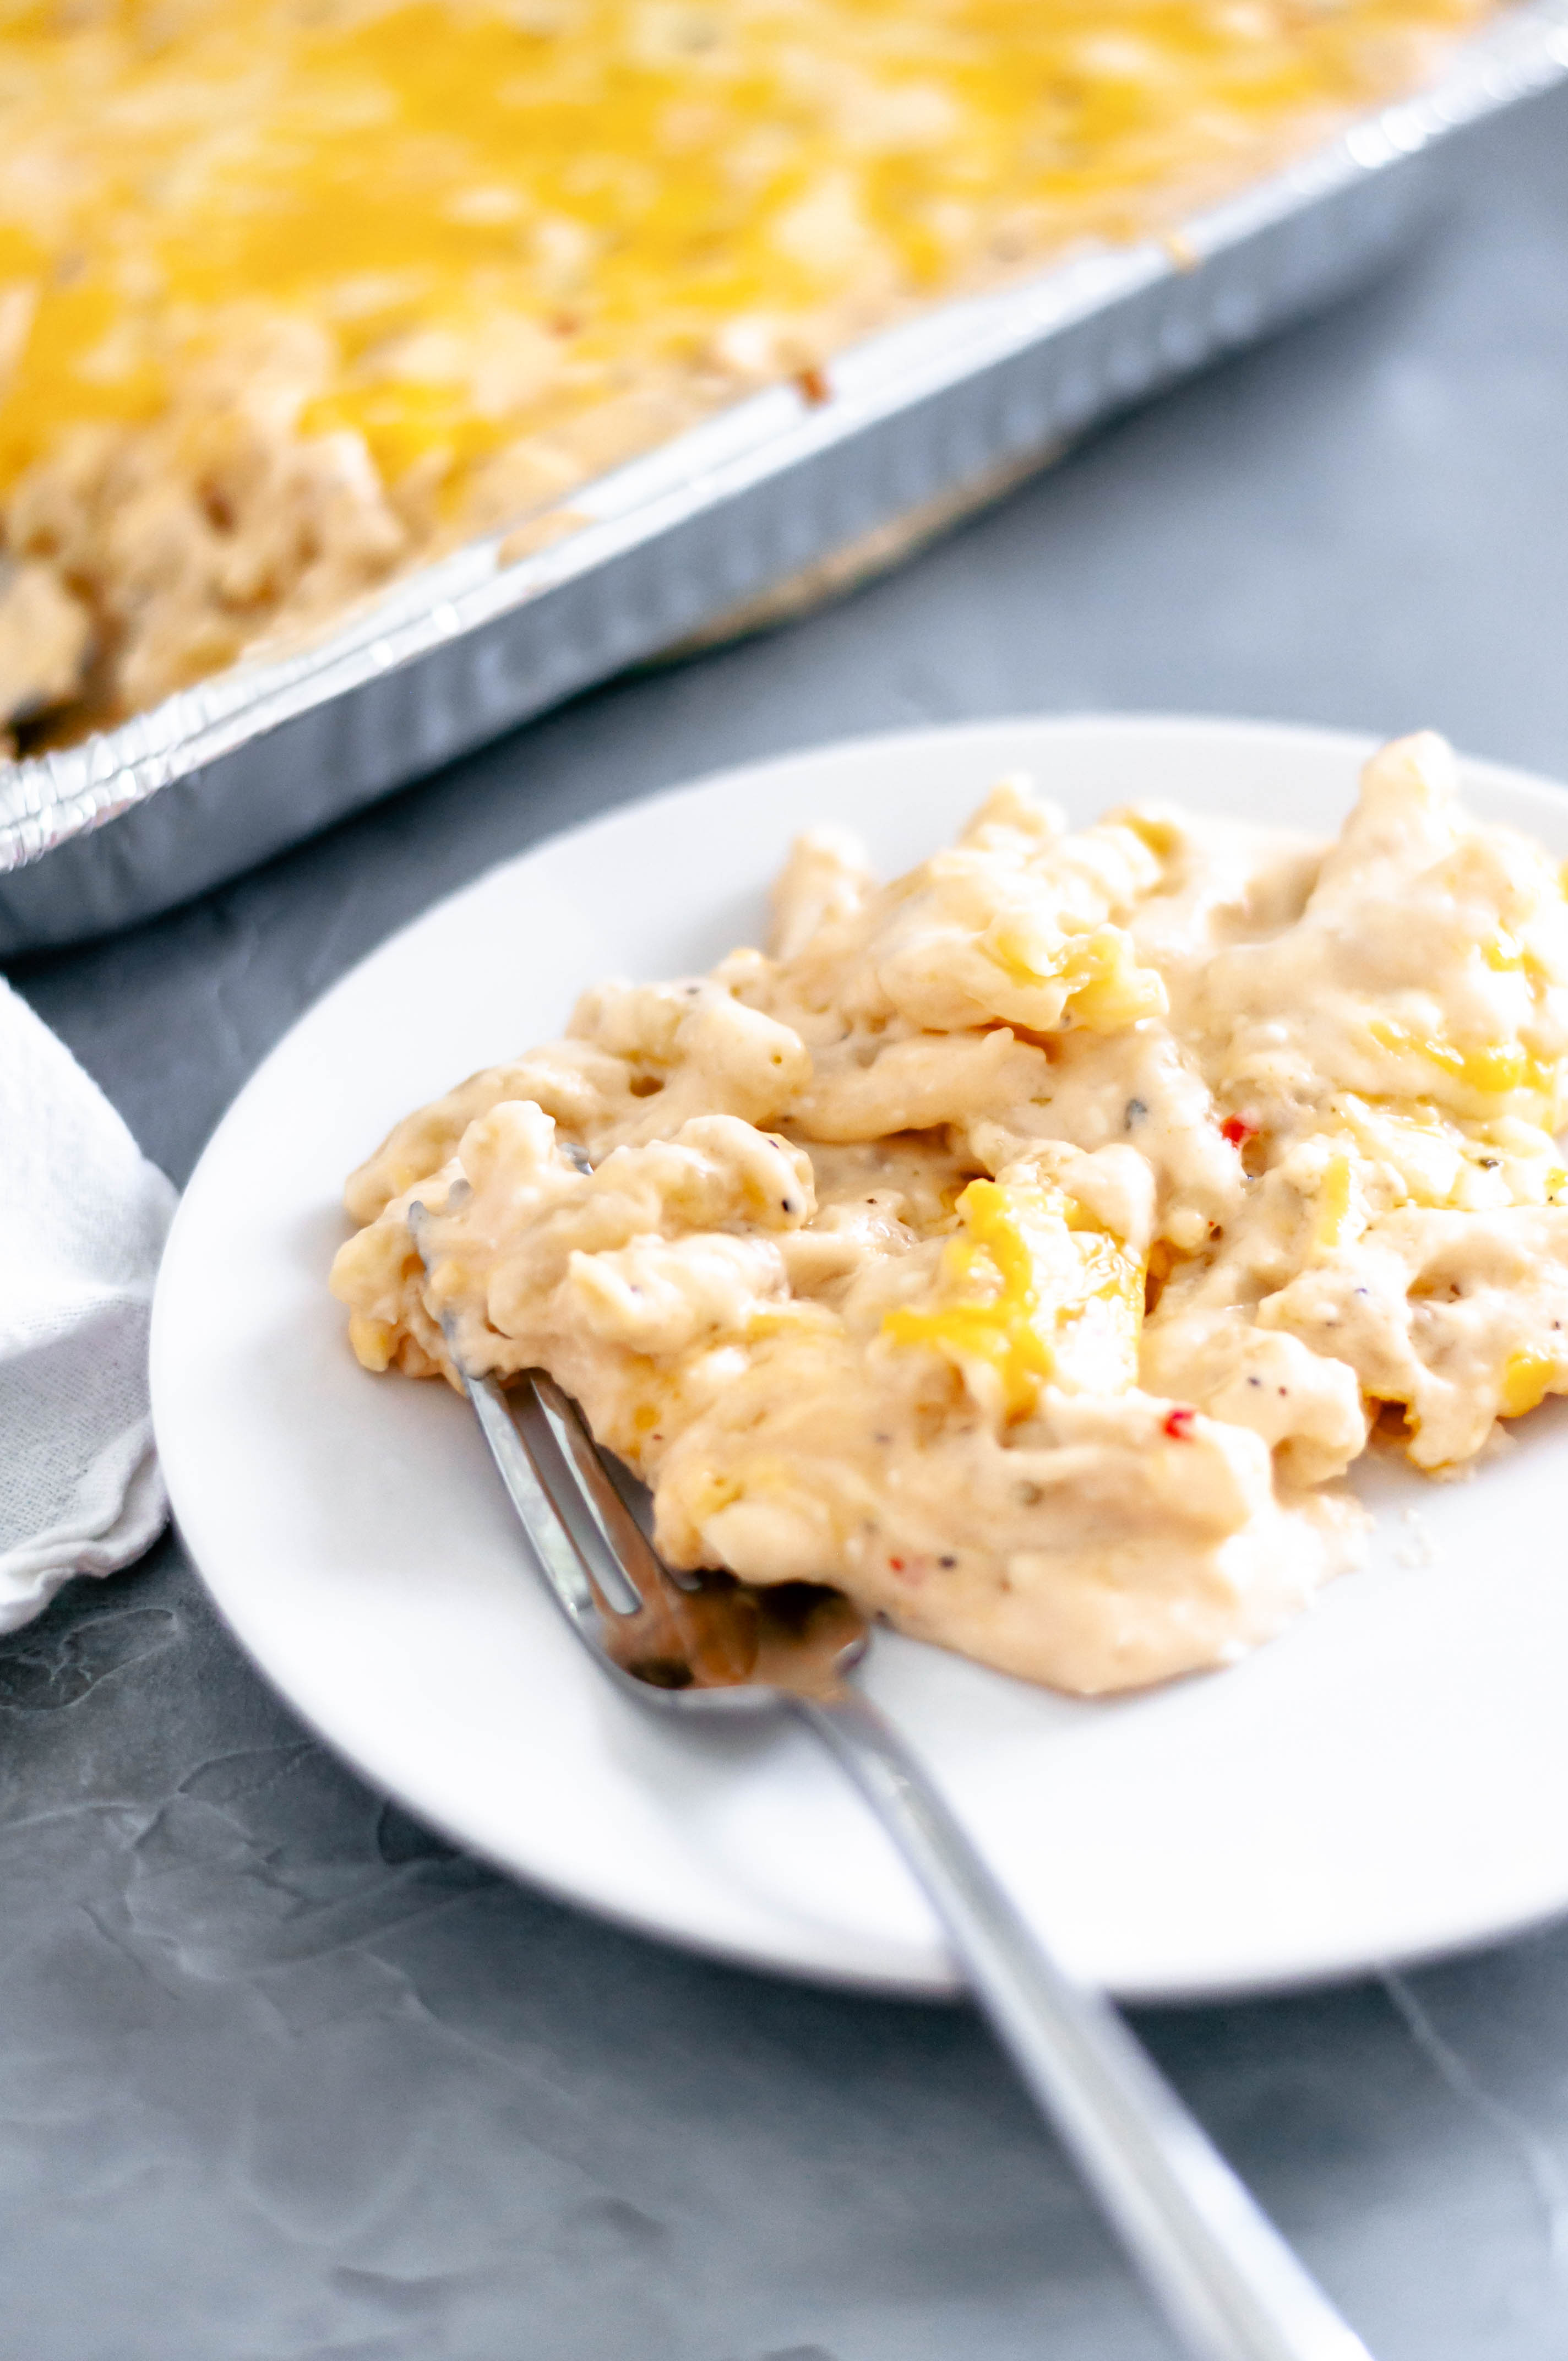 Your smoker doesn't have to be just for meat. This Smoked Macaroni and Cheese has a creamy, three cheese sauce that is tossed with pasta and smoked for a slightly smoky flavor.